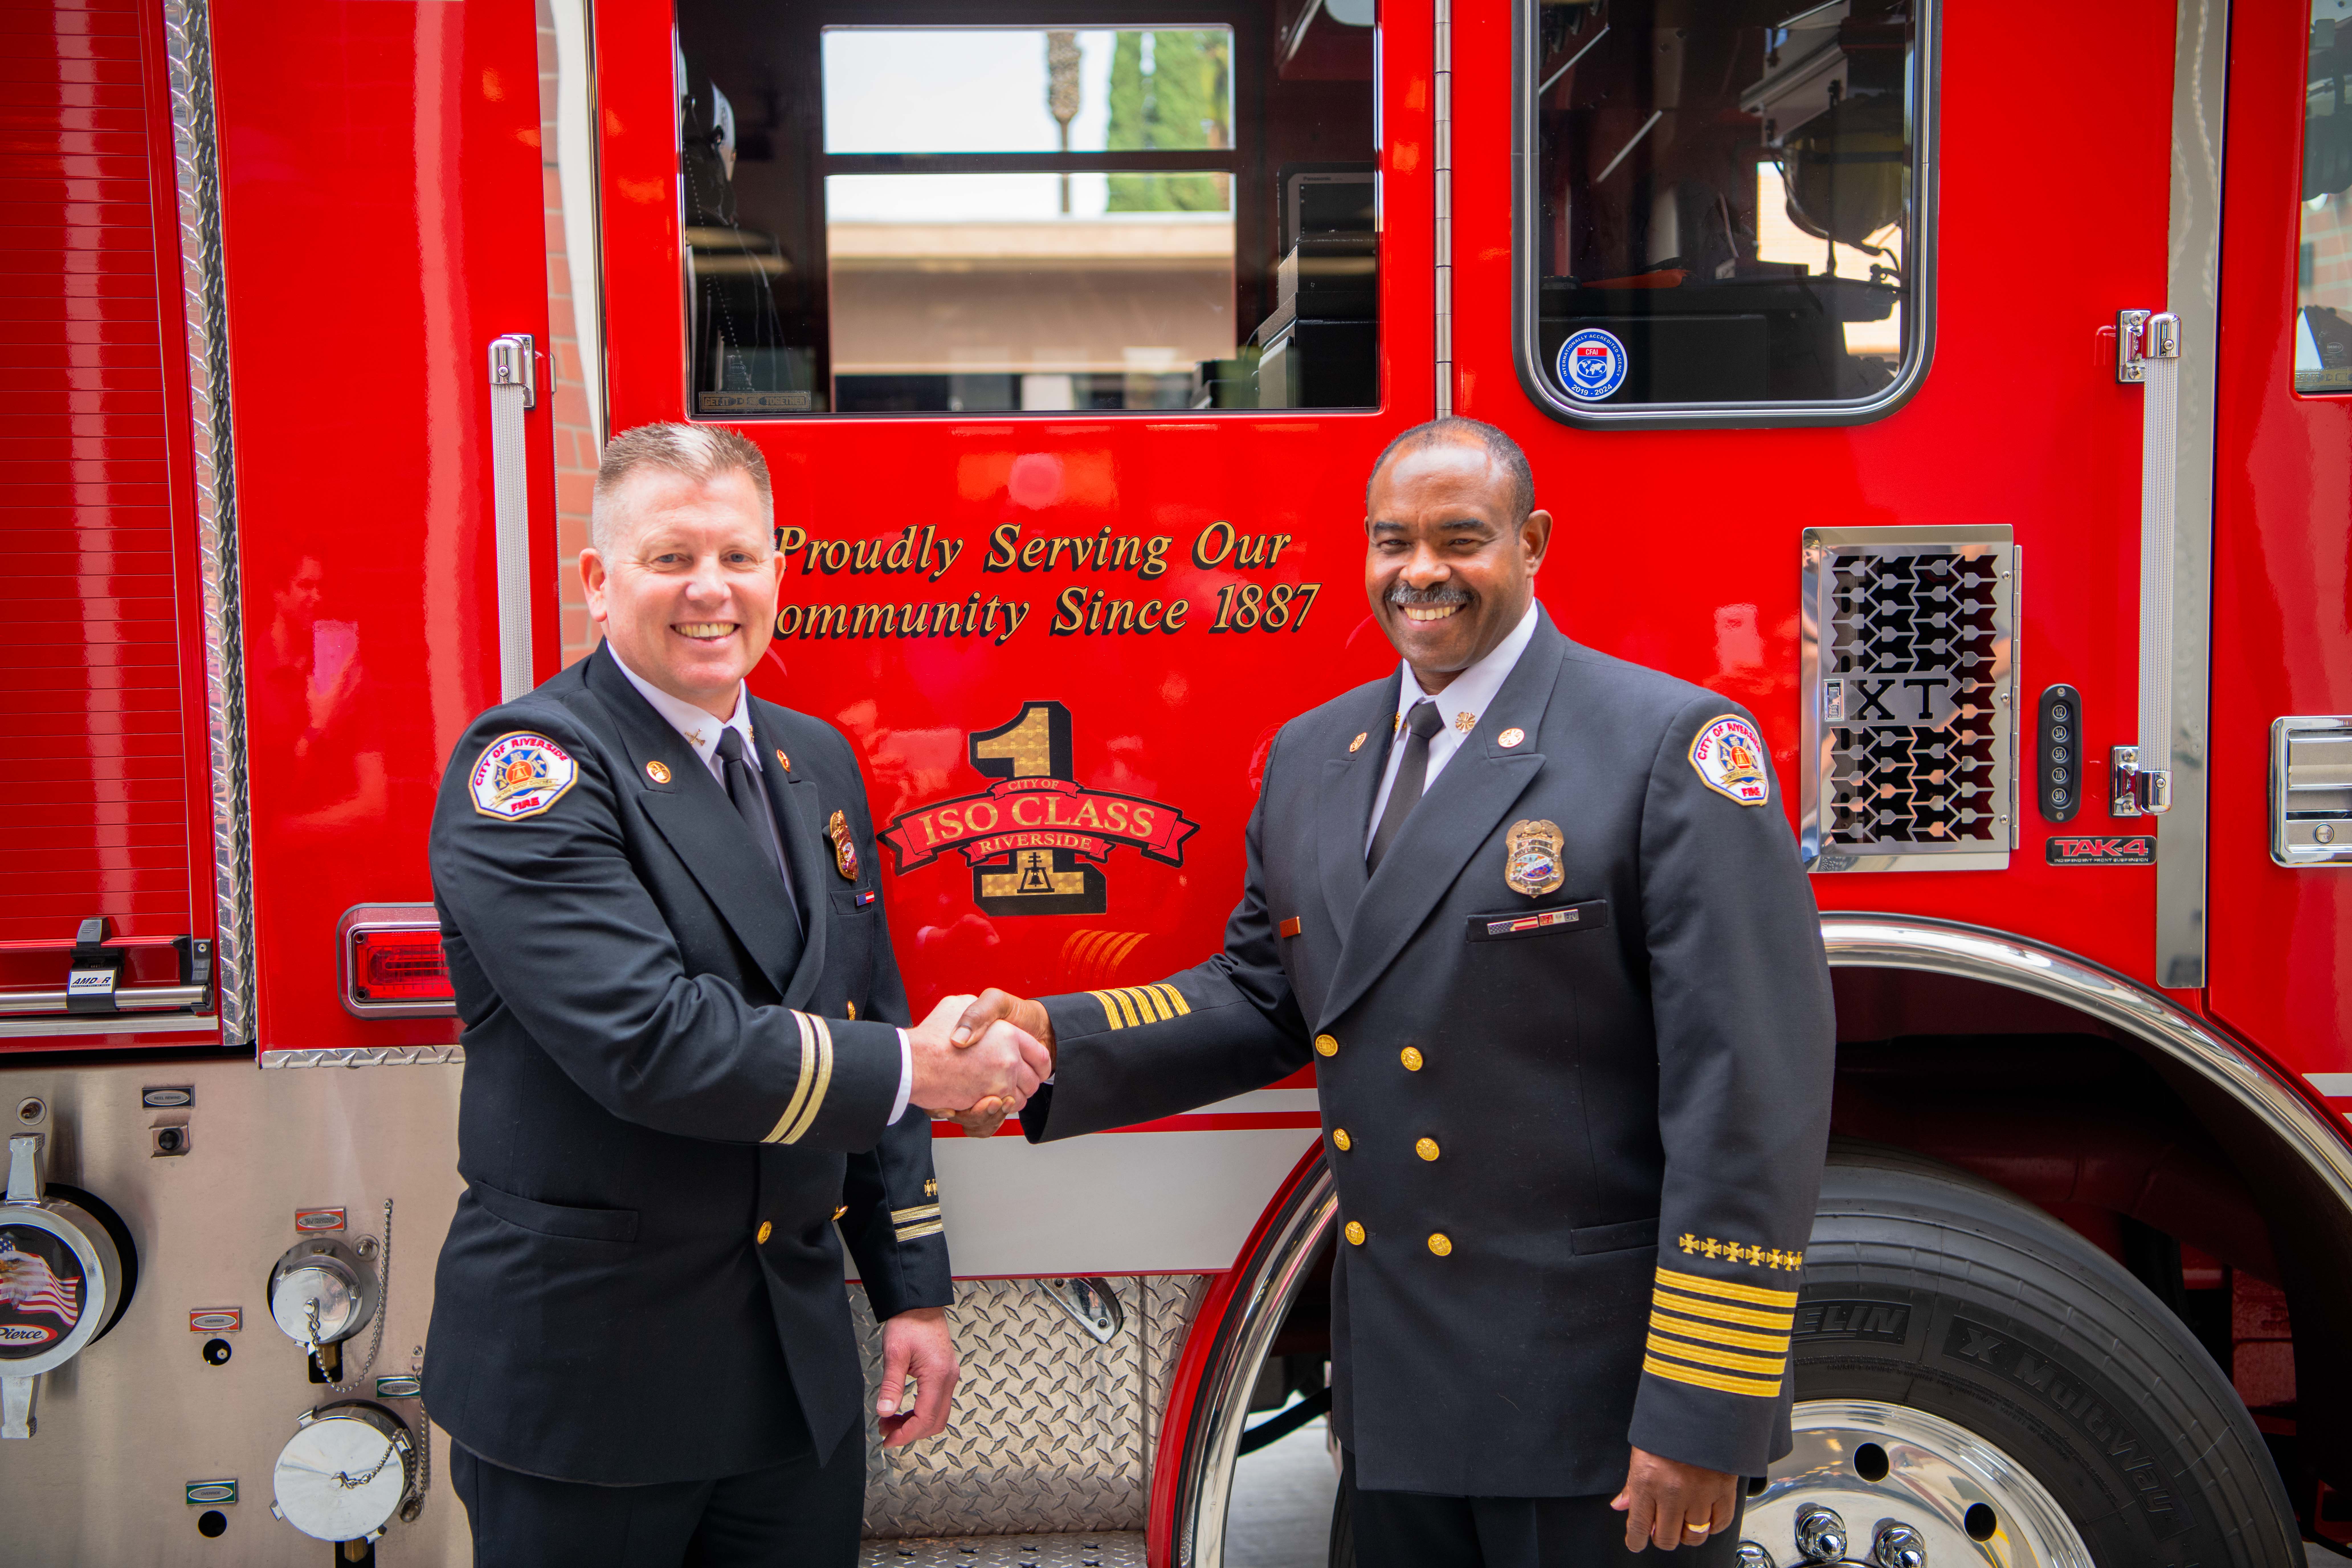 Chief Moore shaking hands in front of a fire engine with Chief Gooch